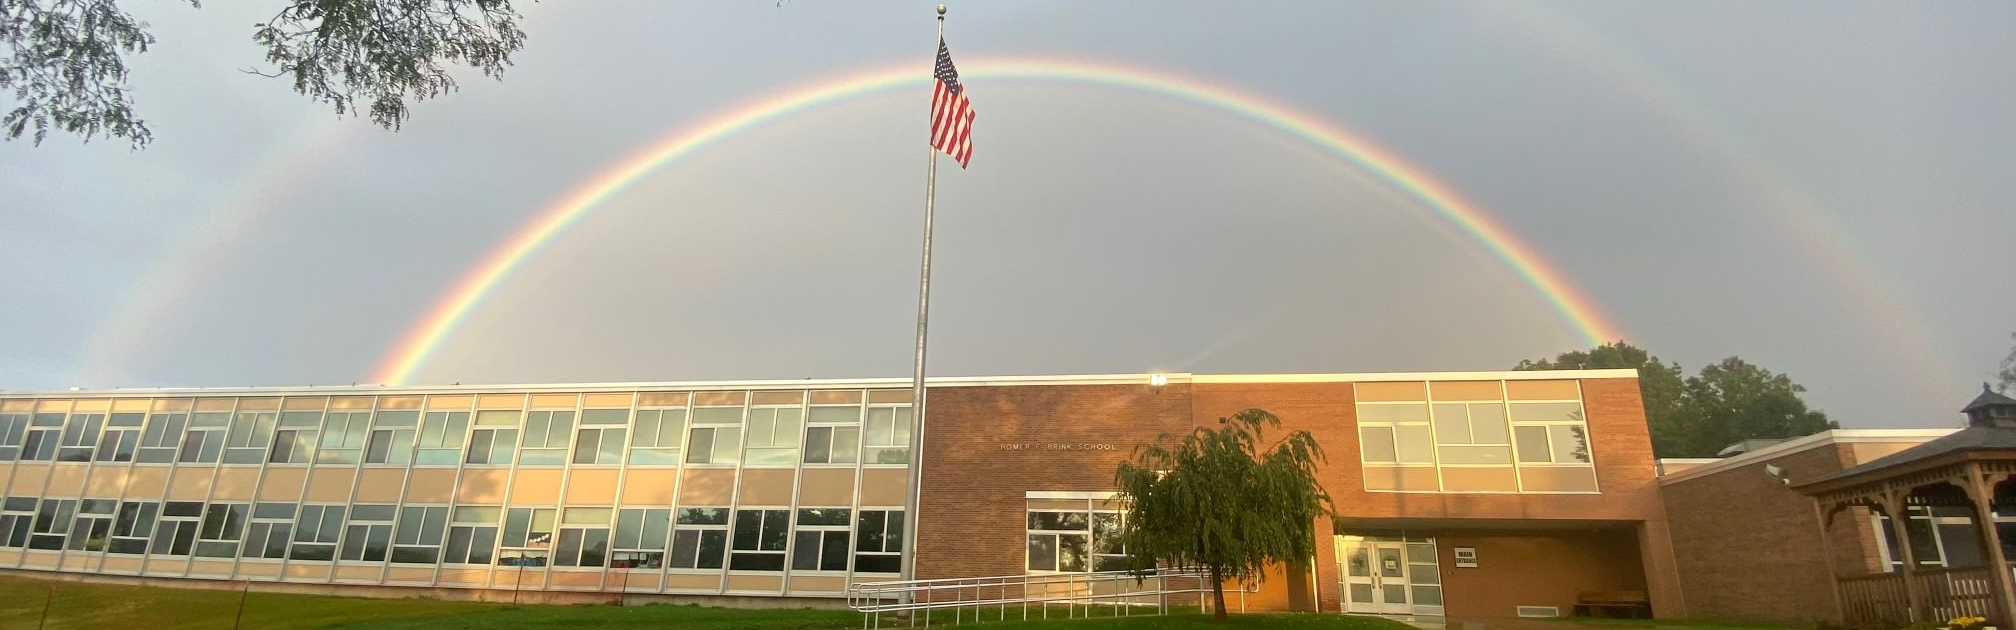 School building with rainbow above it